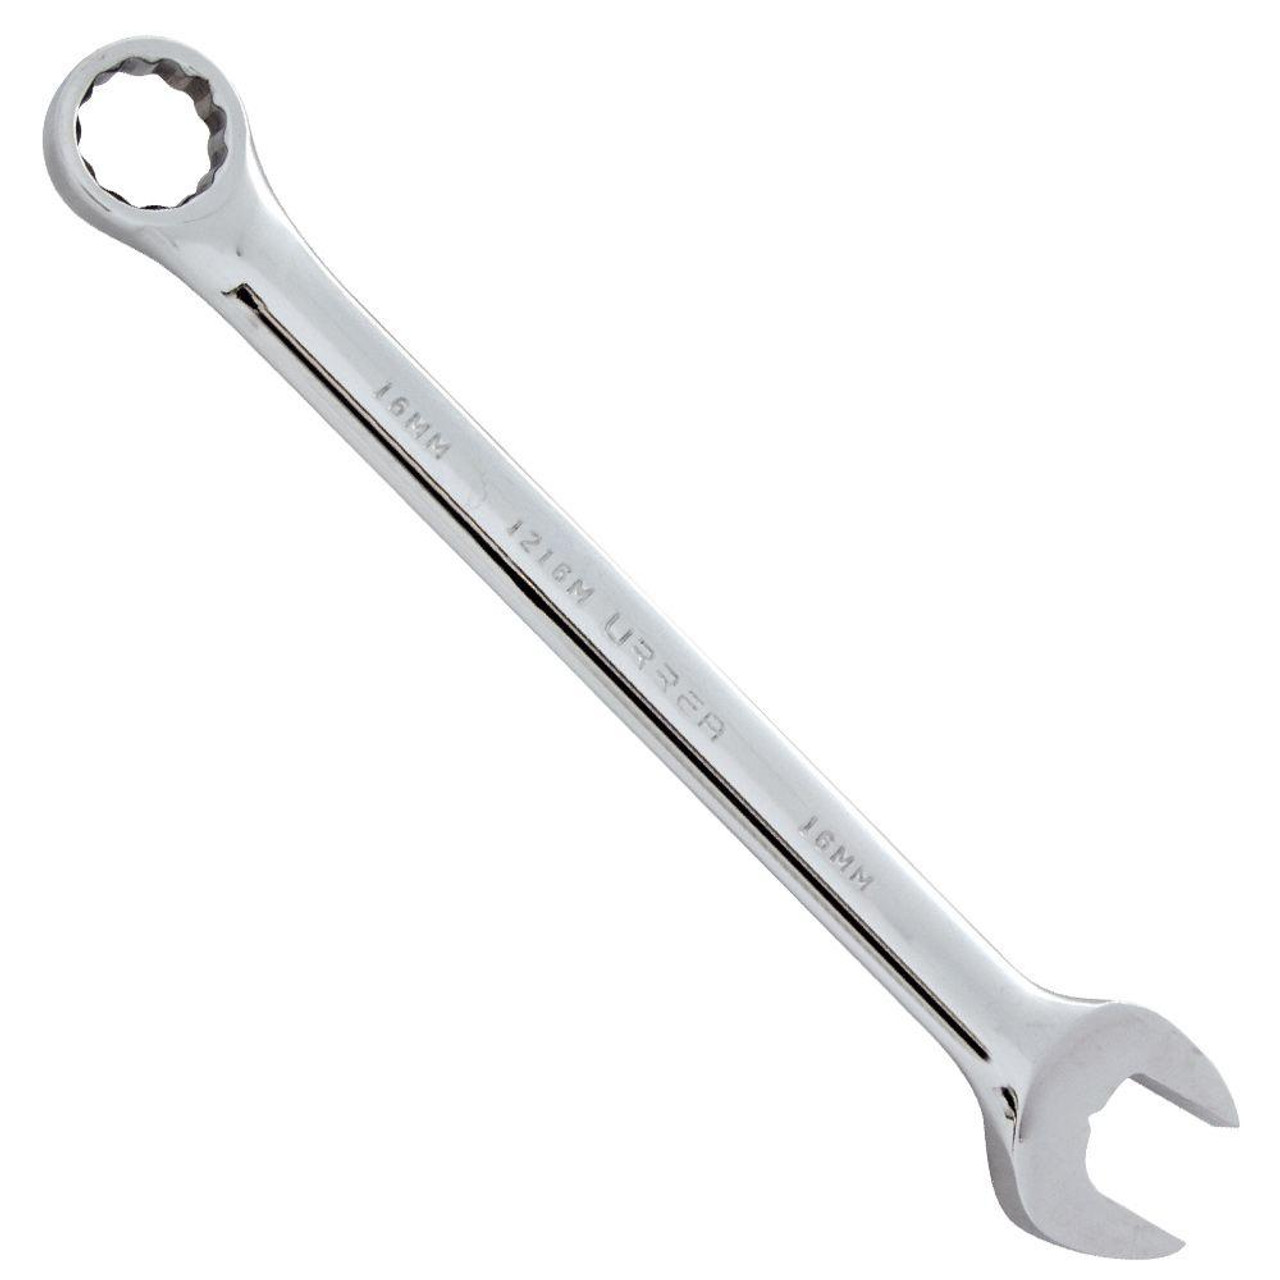 Satin finish combination wrench, Size: 50mm, 12 point, Tool Length: 28"